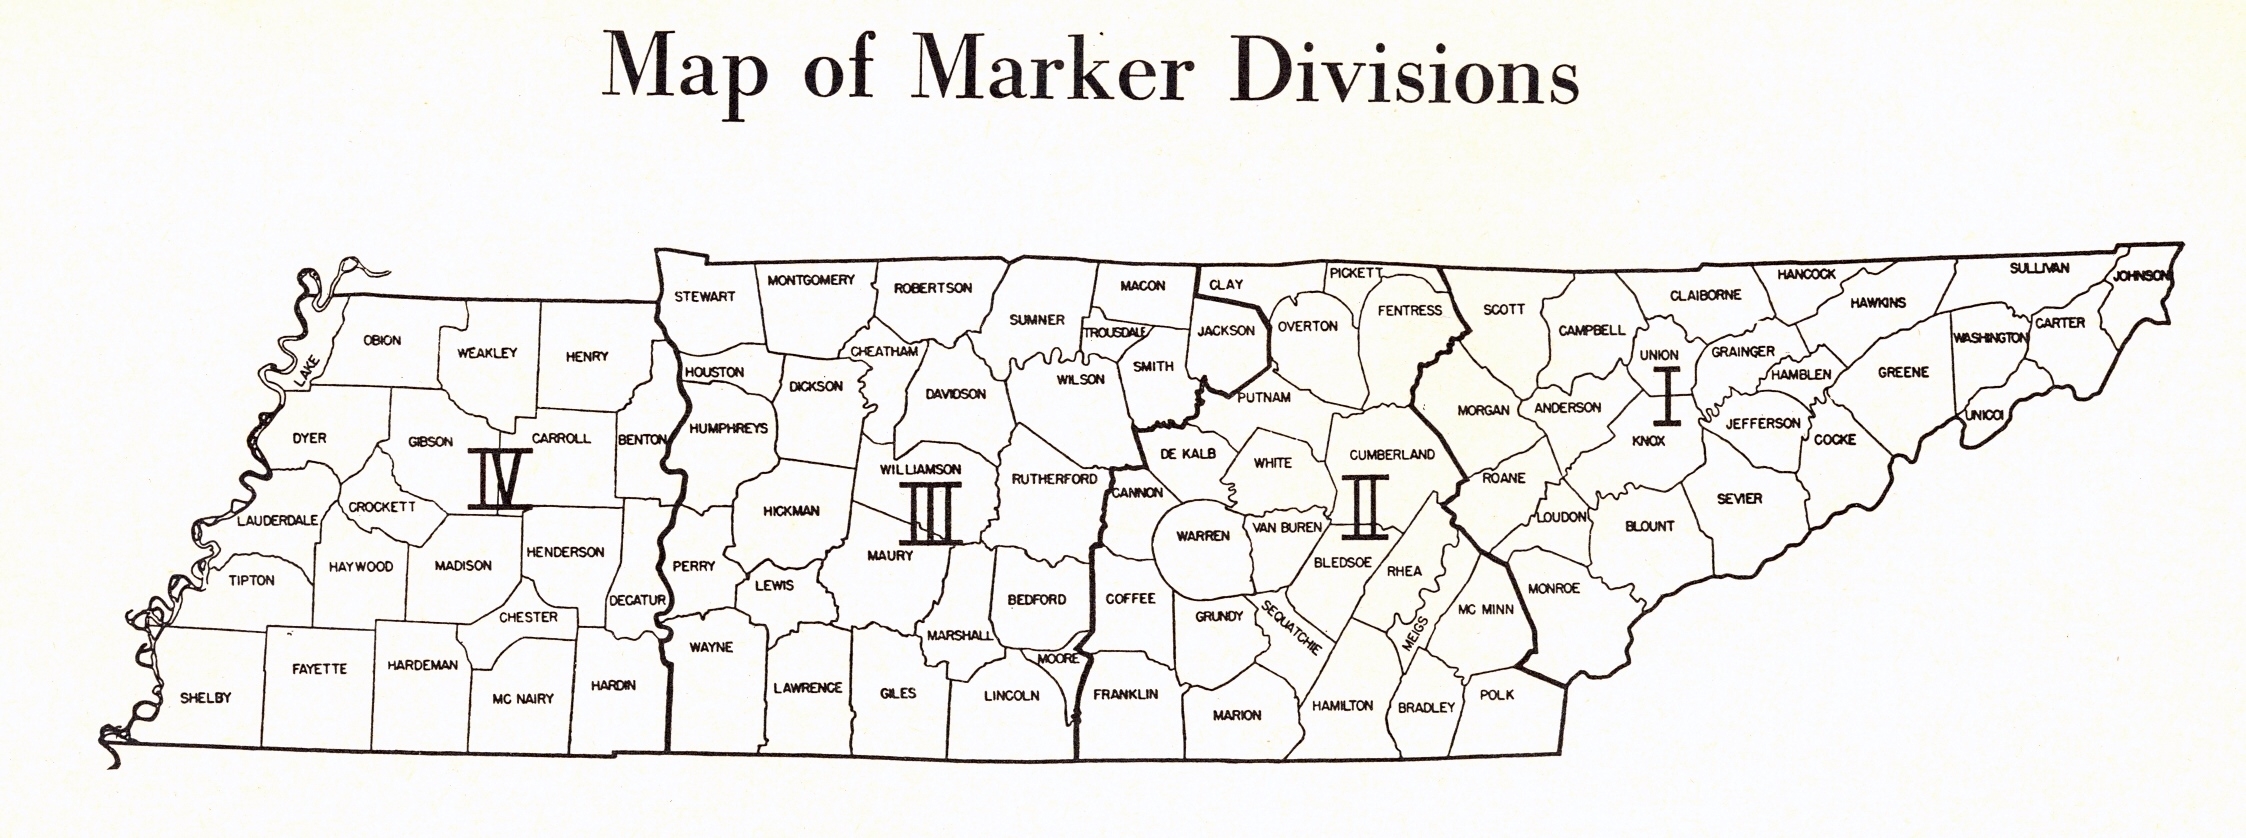 Map of Tennessee Marker Divisions